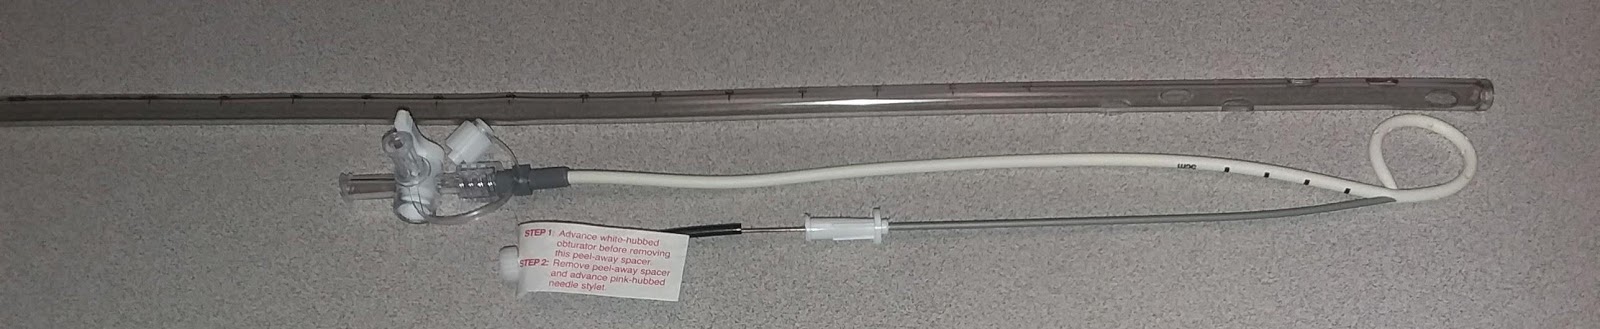 M4 Fig 6 Pneumothorax –A commercial pigtail catheter, compared to a 24Fr chest tube